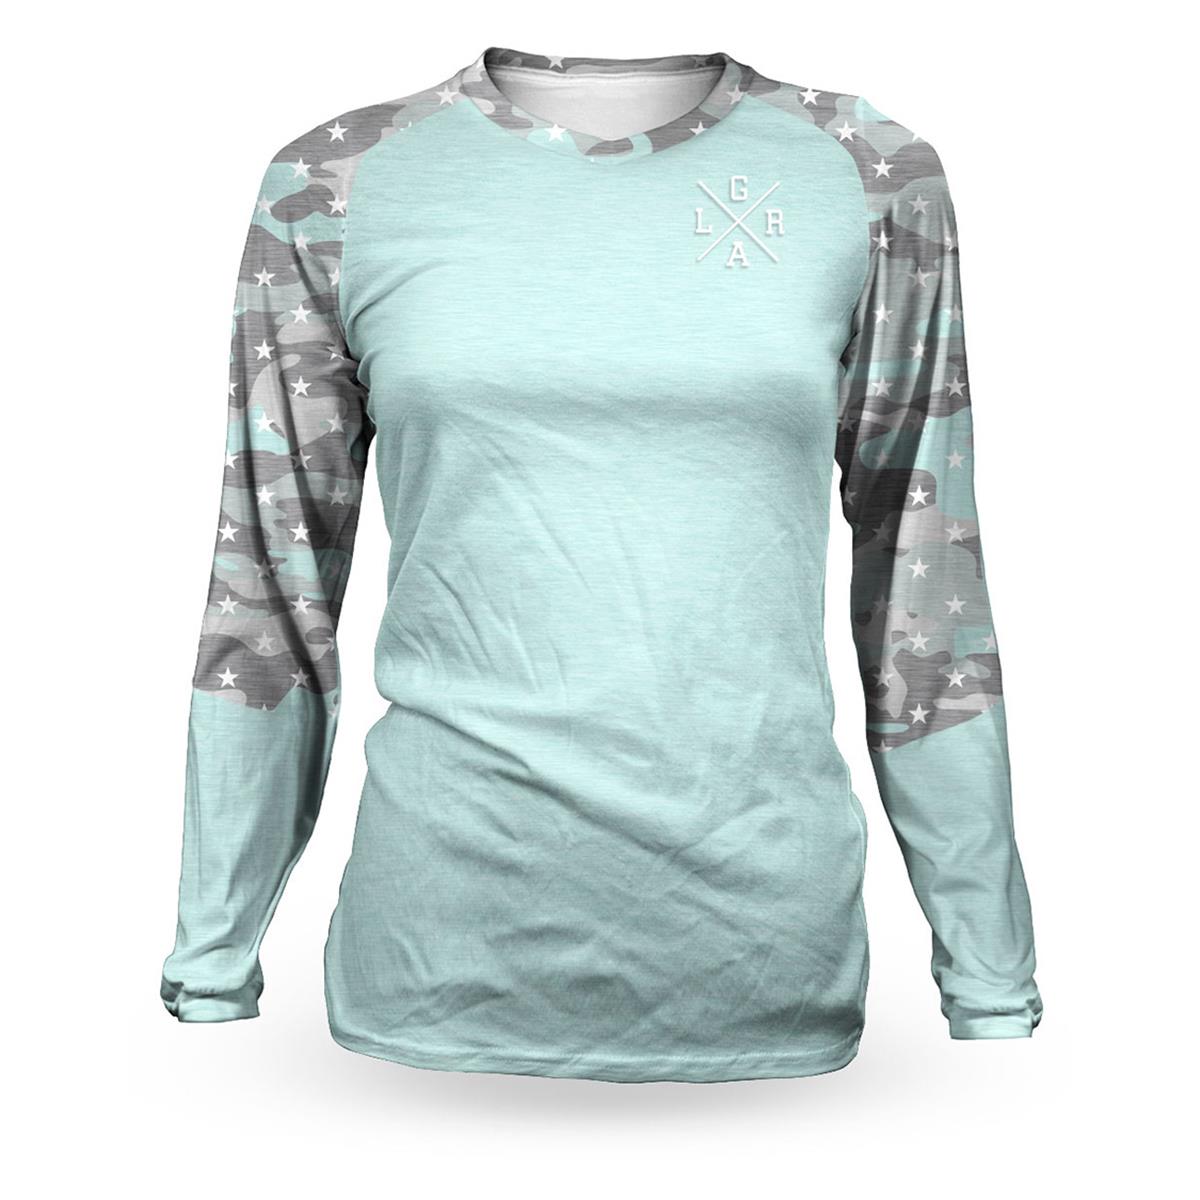 Loose Riders Femme Maillot VTT Manches Longues  Camo Grey - Mint/Grey